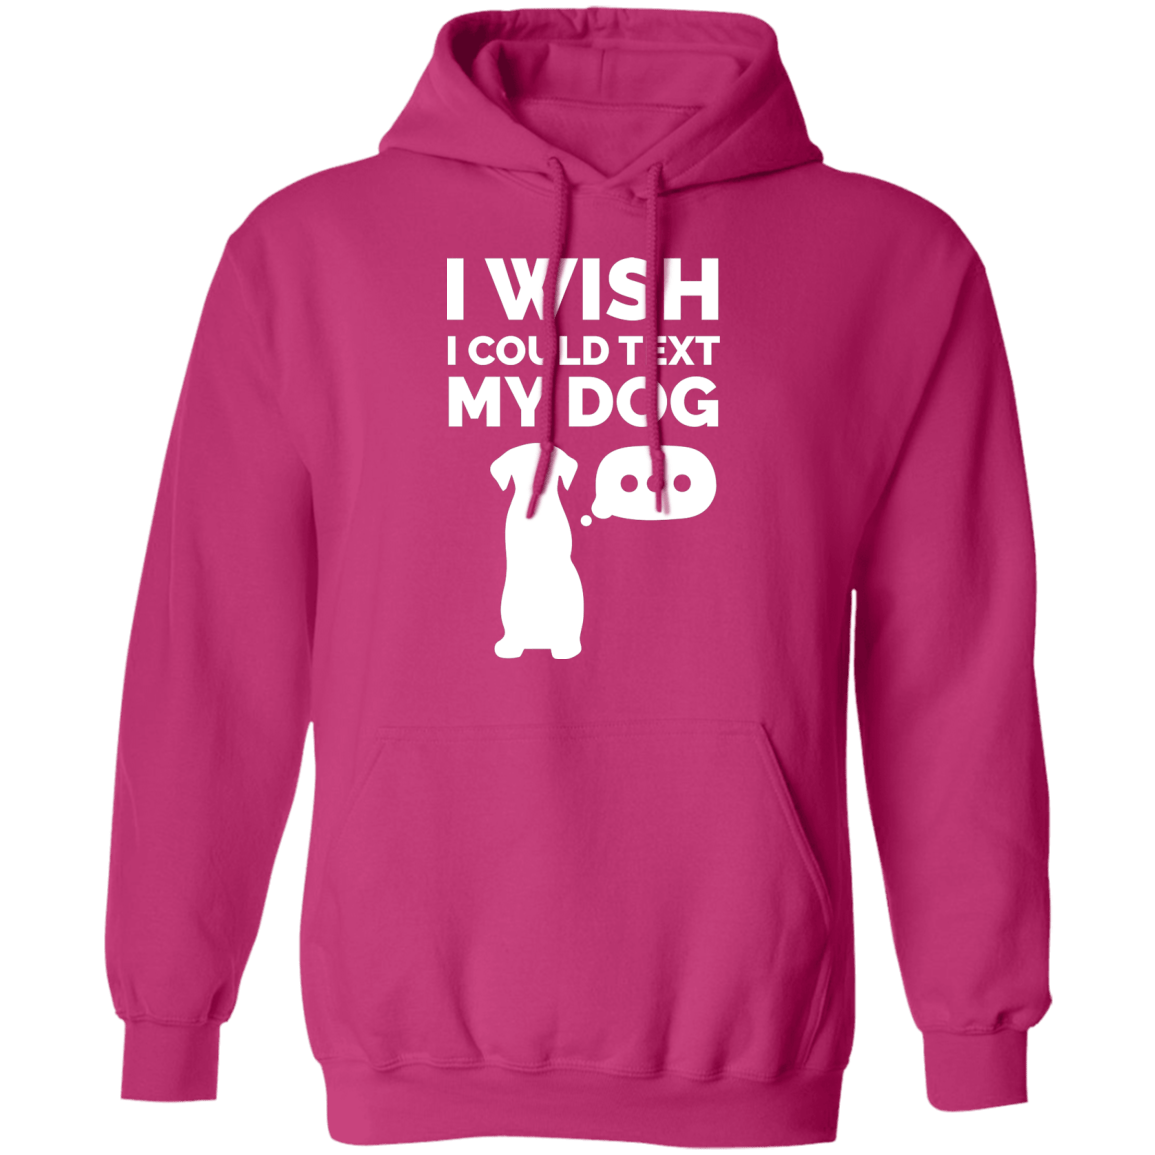 I Wish I Could Text My Dog - Hoodie.